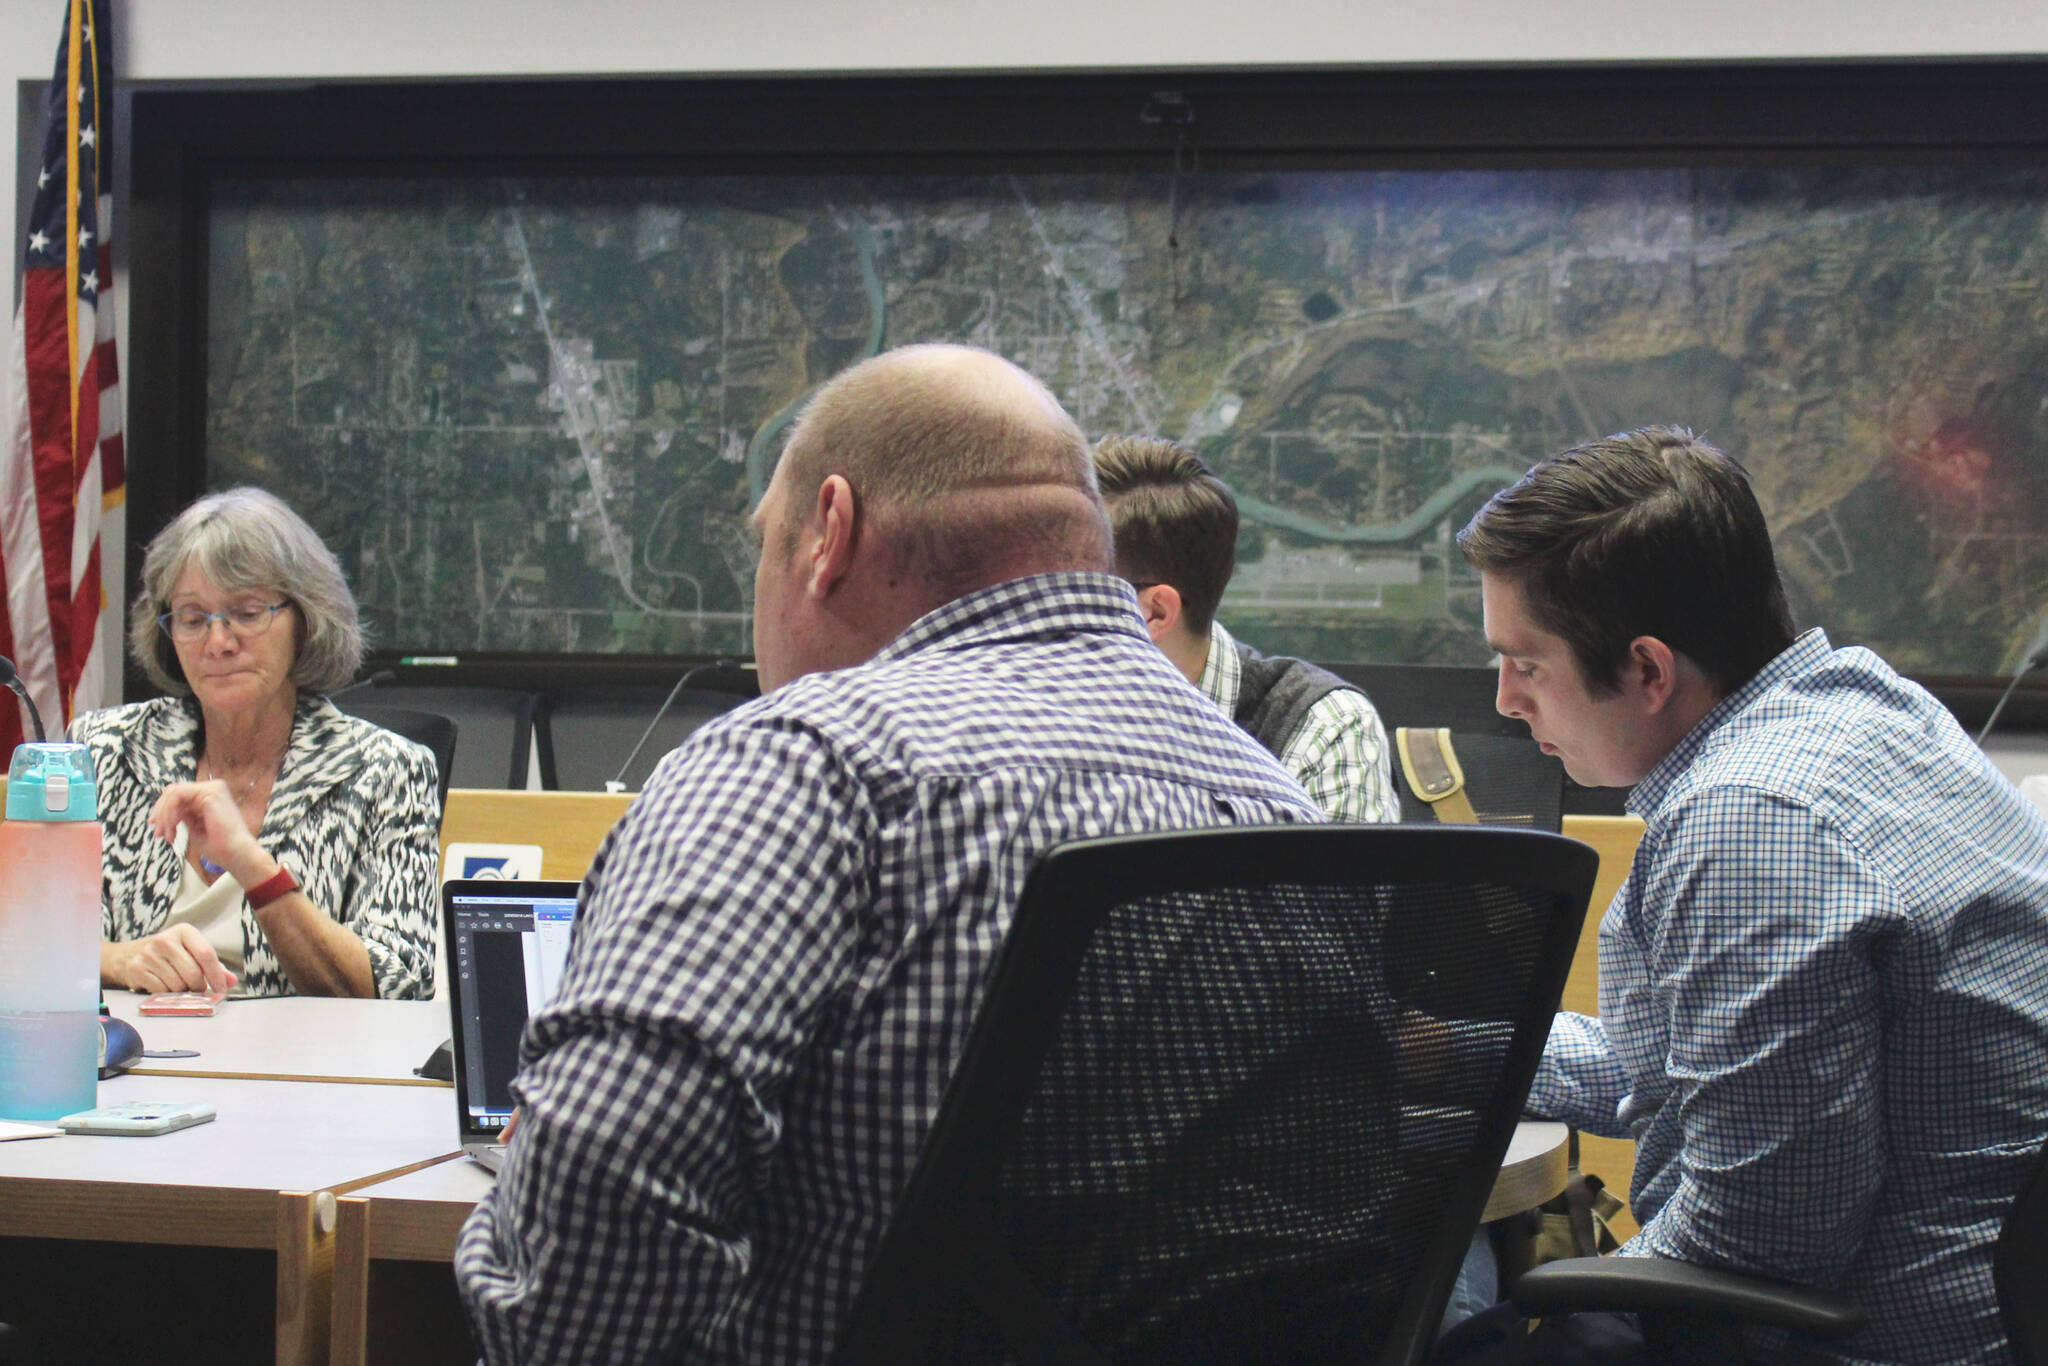 Soldotna City Council members convene for a work session to discuss how the city should use federal COVID-19 recovery funds on Wednesday, April 27, 2022, in Soldotna, Alaska. (Ashlyn O’Hara/Peninsula Clarion)